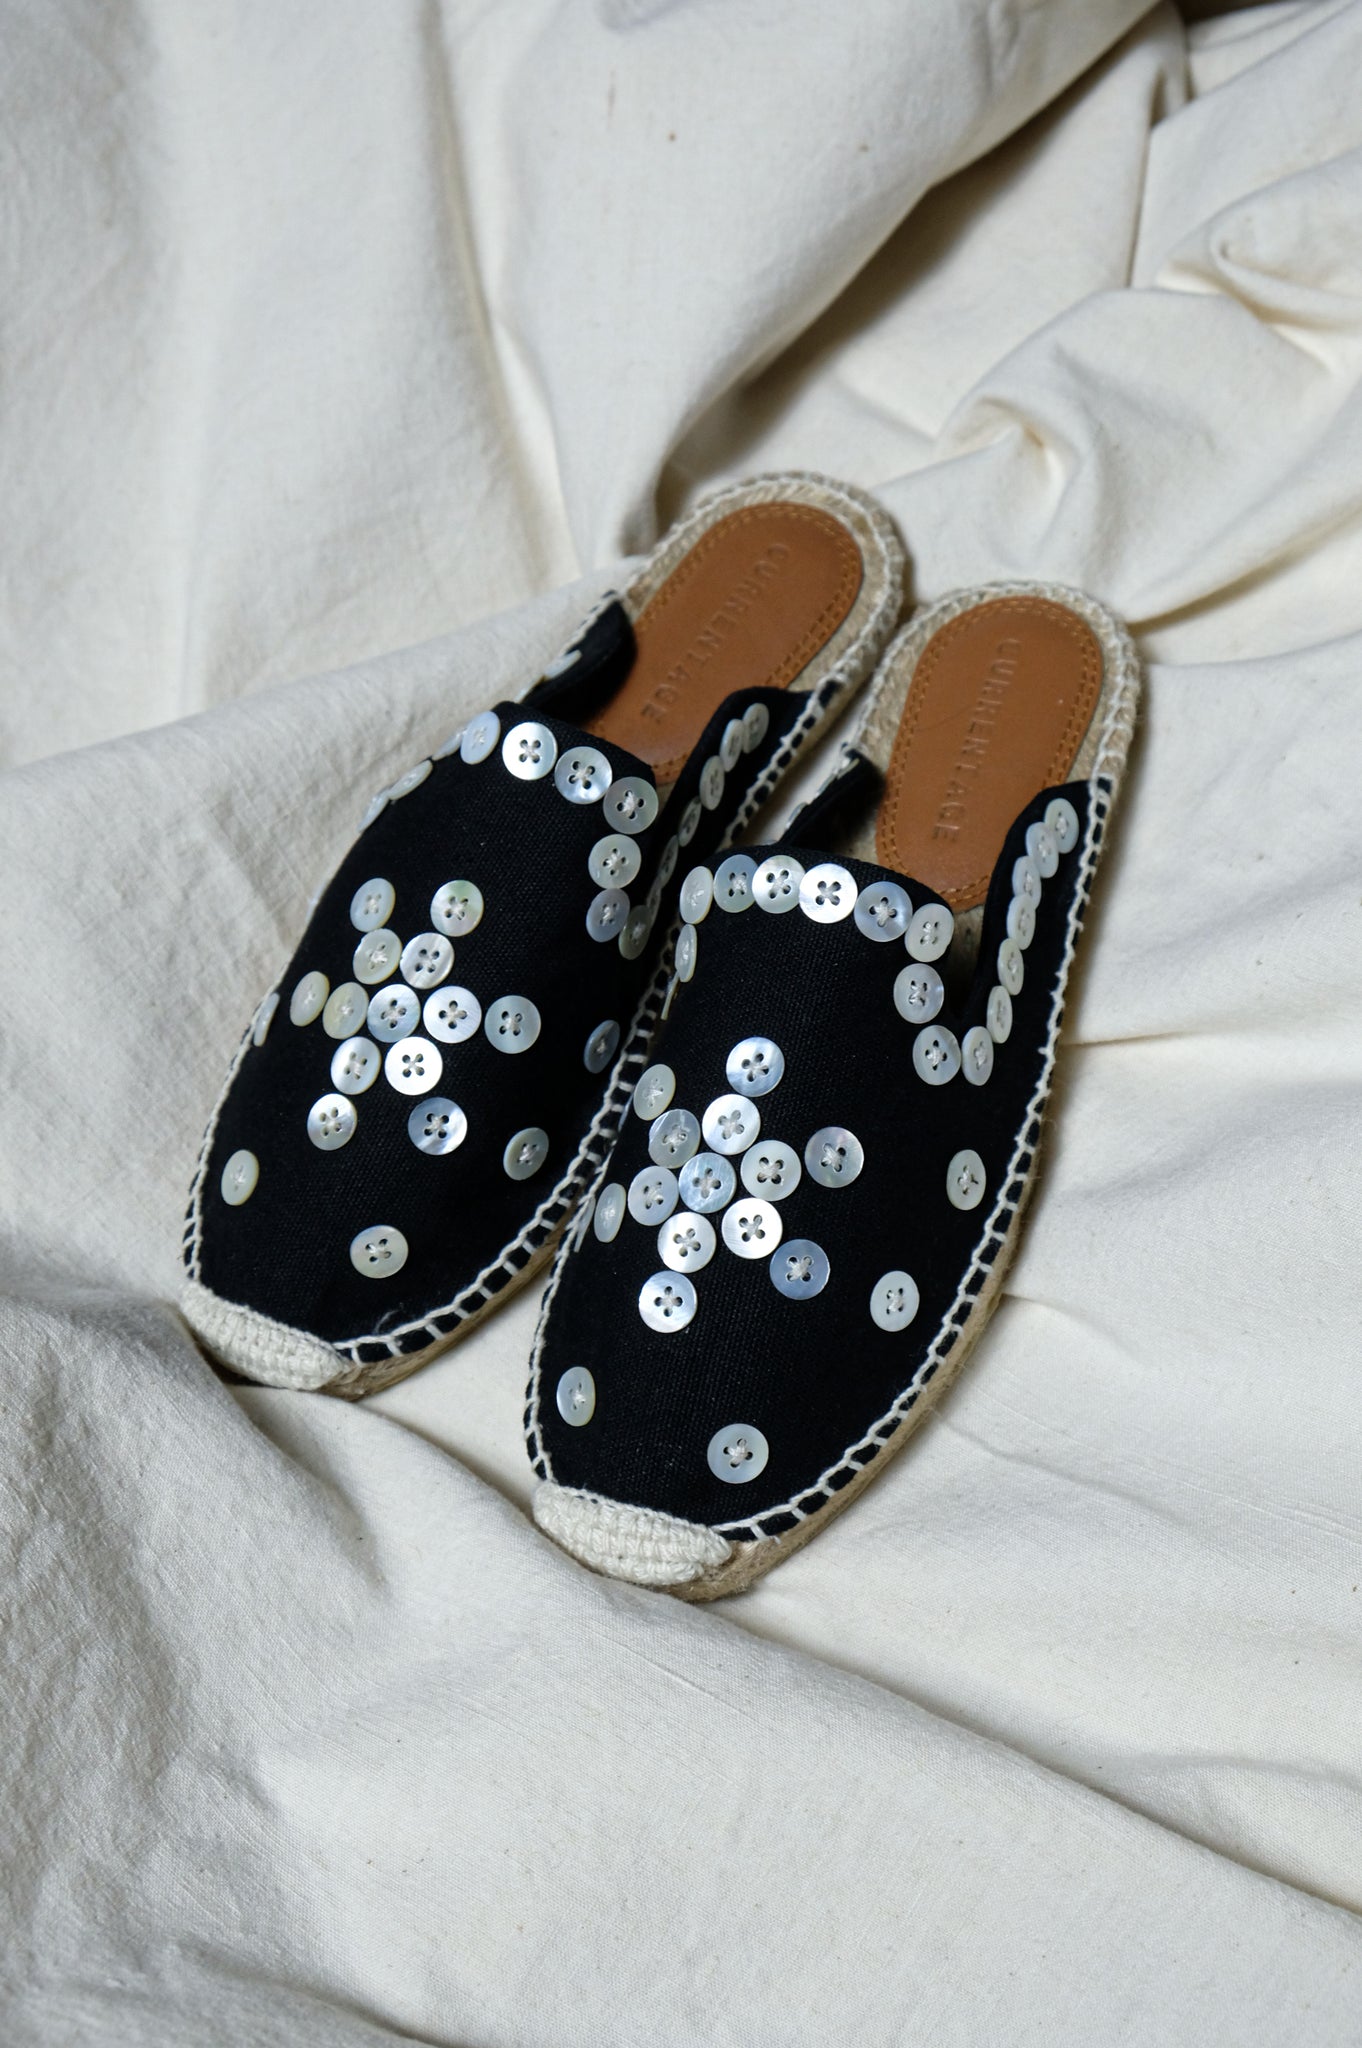 CURRENTAGE"PEARLY KING AND QUEENS ESPADRILLE SLIPPER"